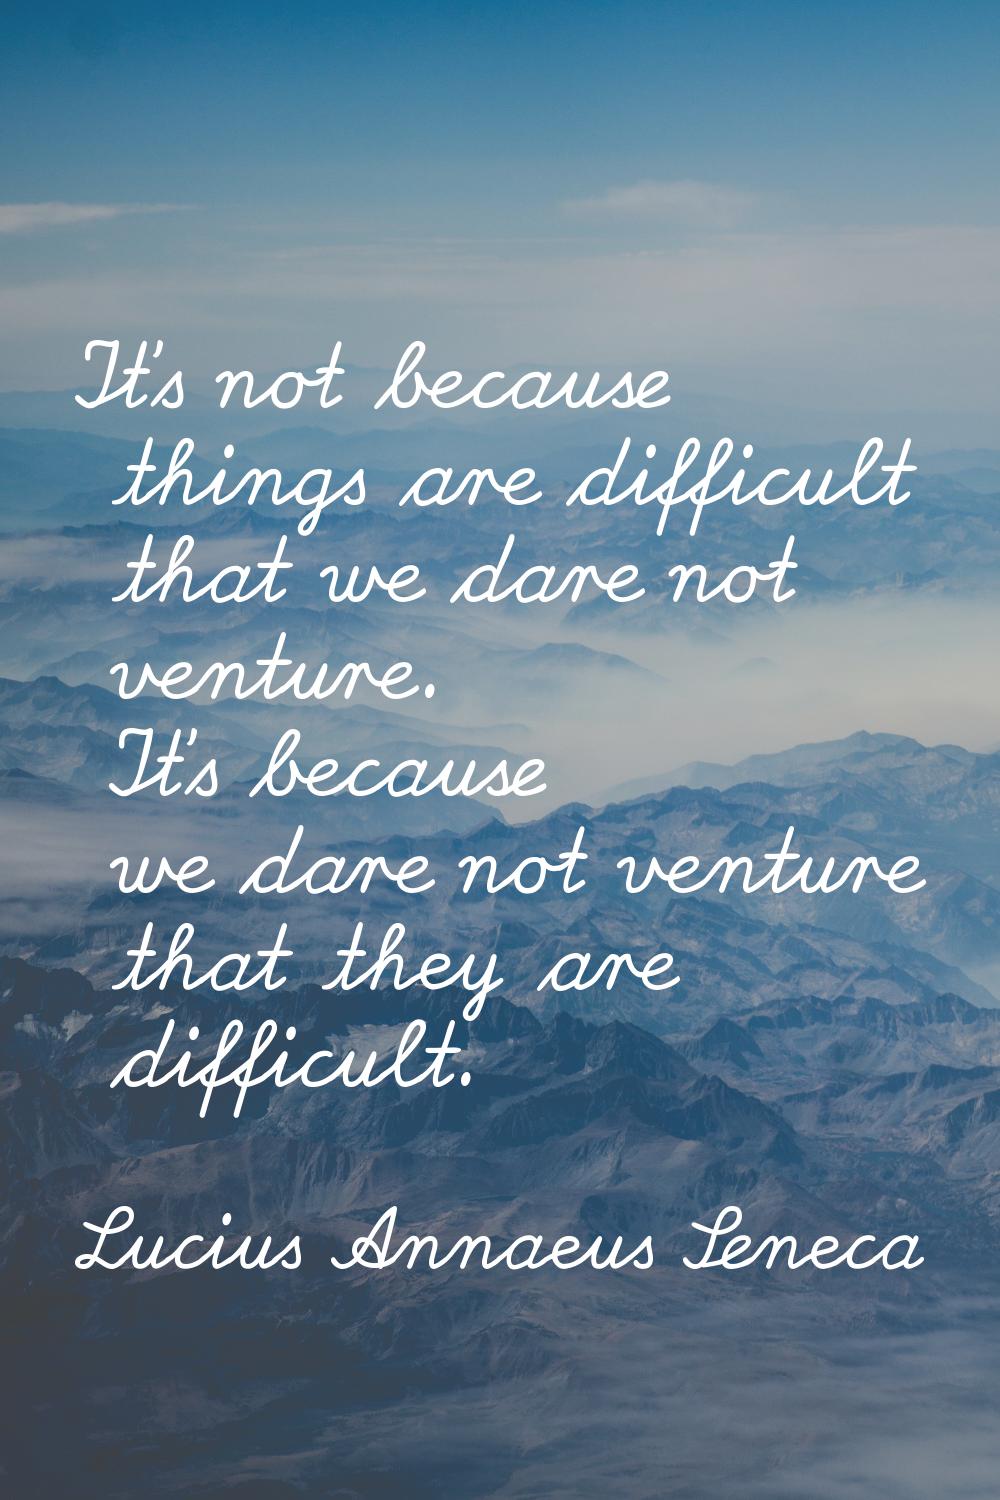 It's not because things are difficult that we dare not venture. It's because we dare not venture th